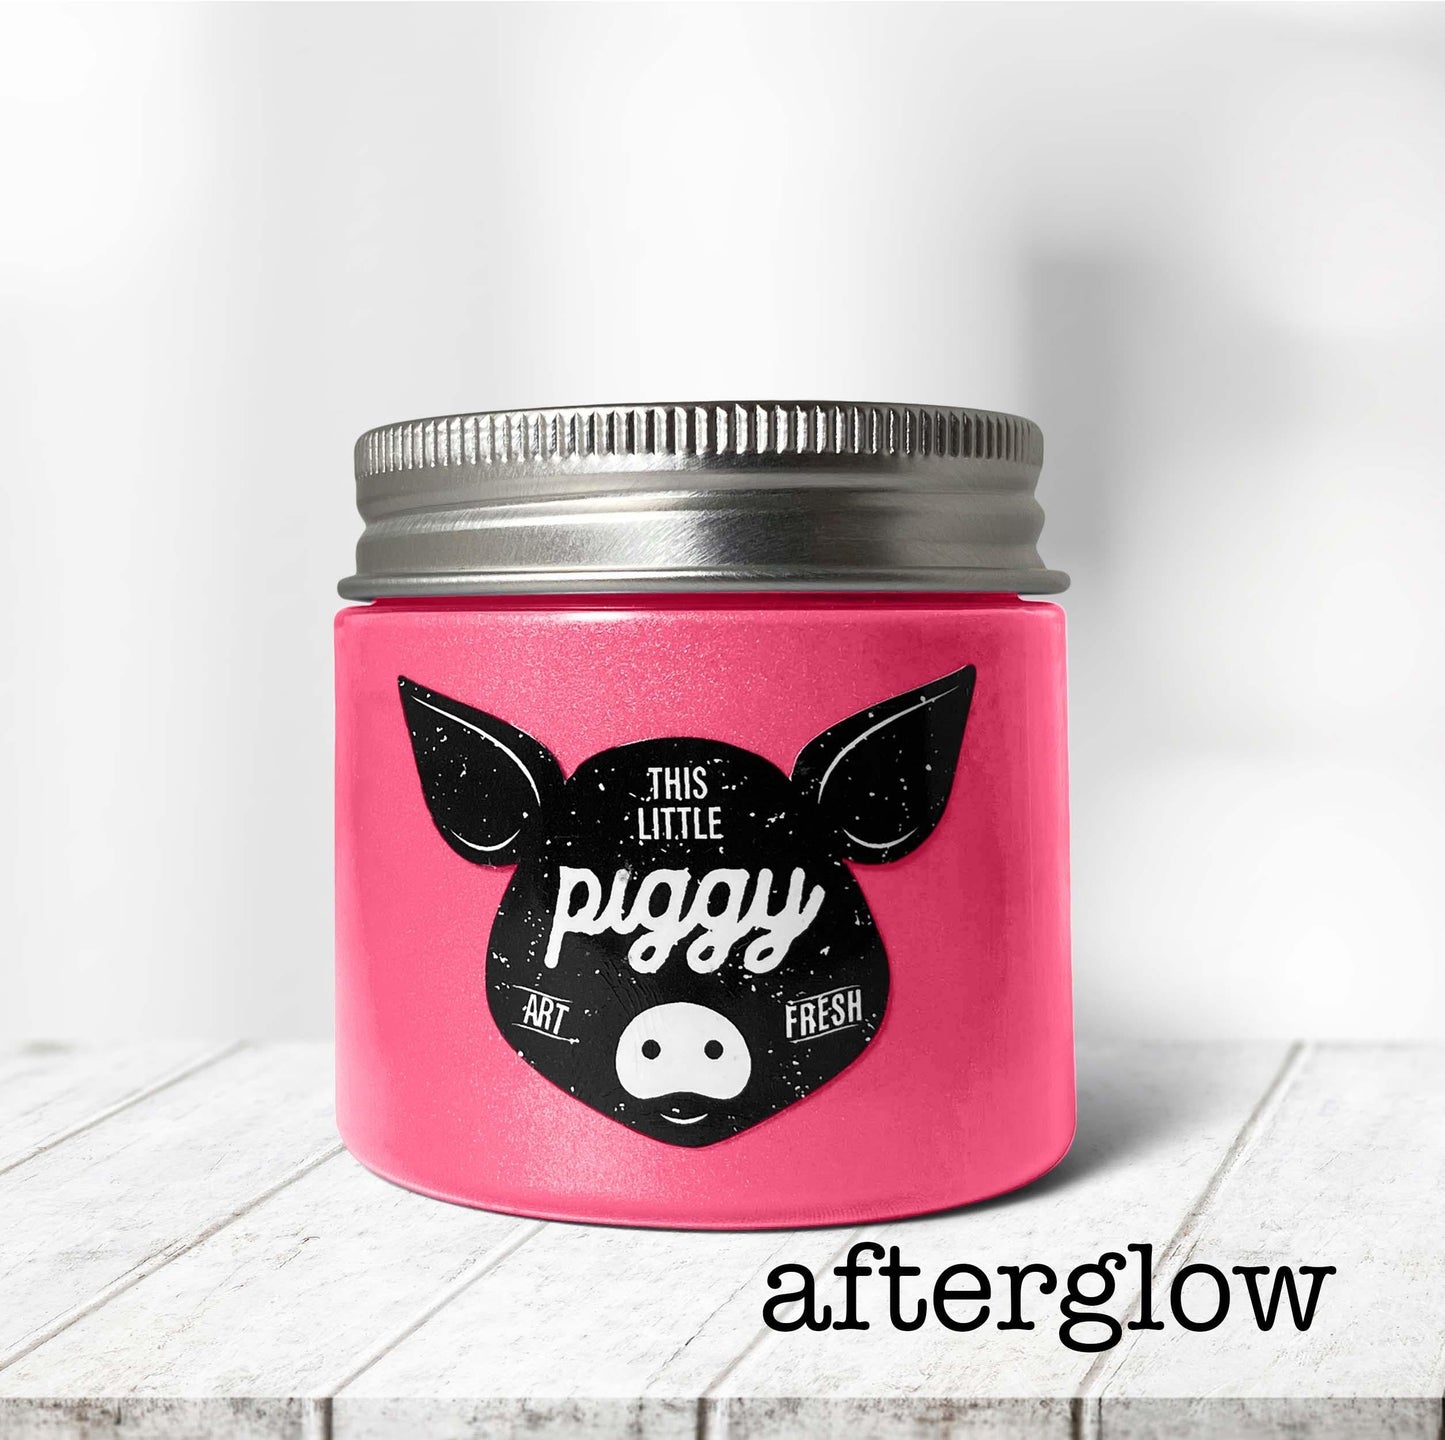 This Little Piggy : Afterglow